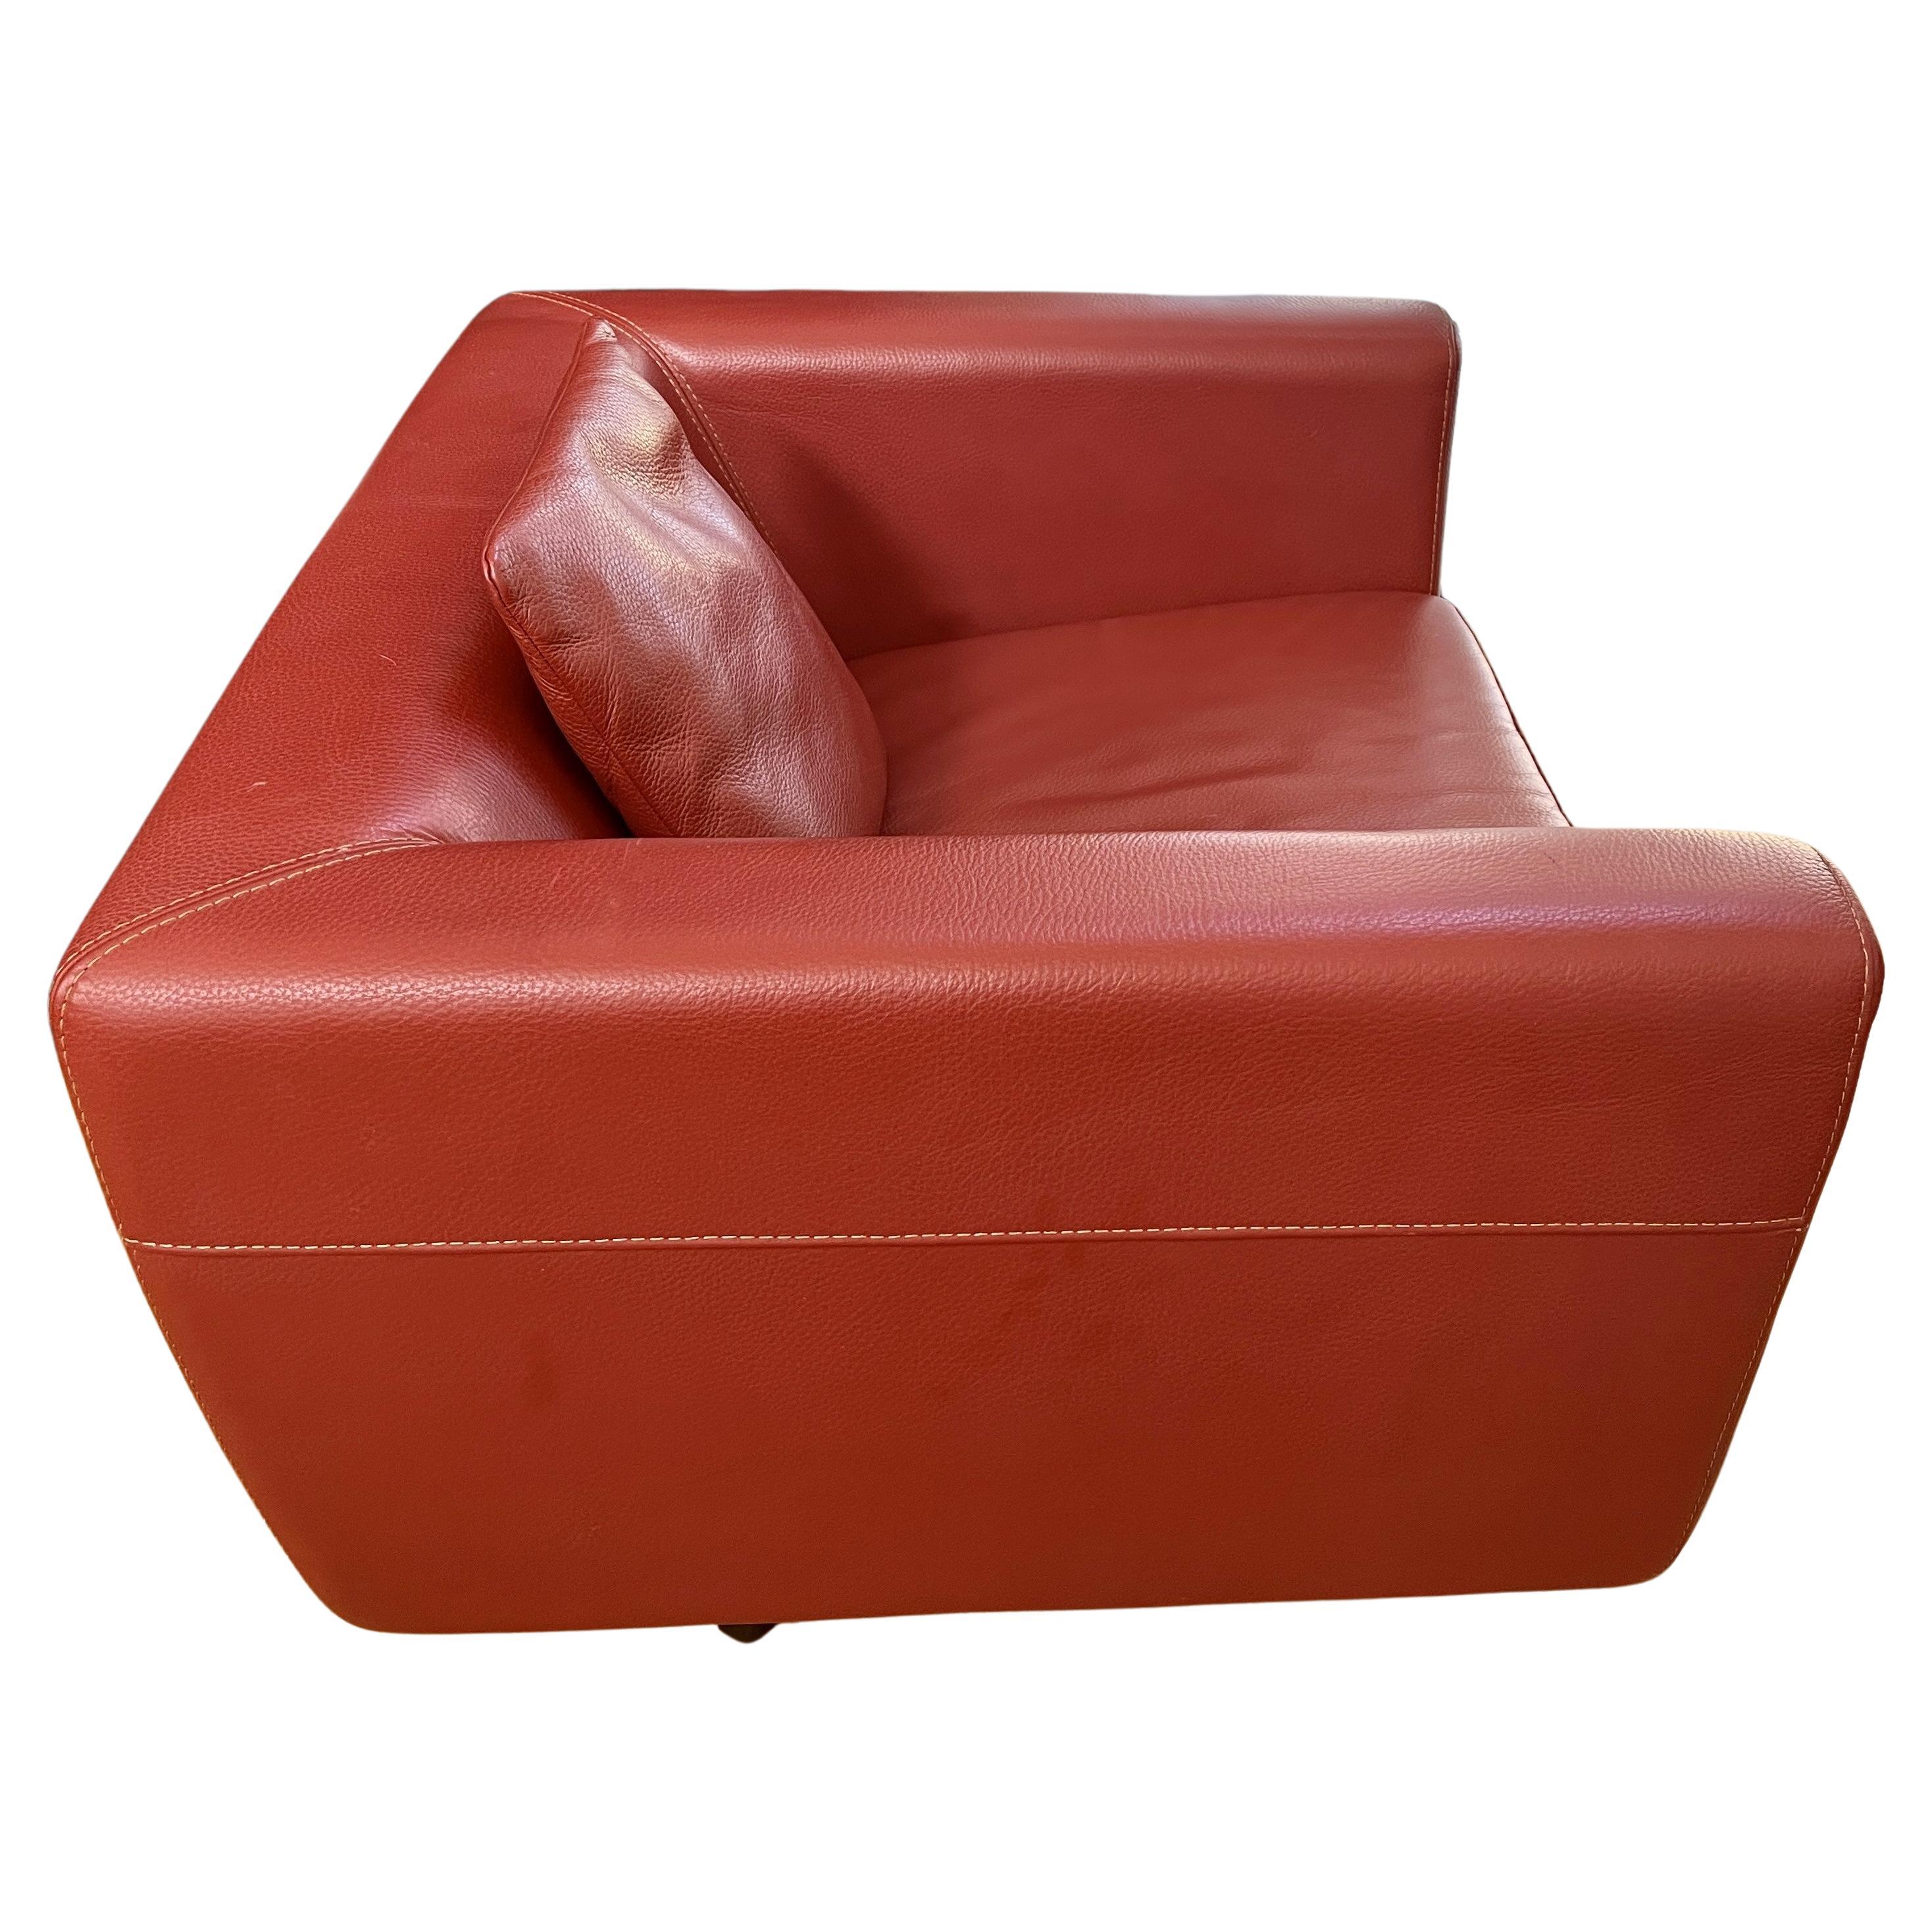 French Roche Bobois Swivel Armchair in Brick Red Leather